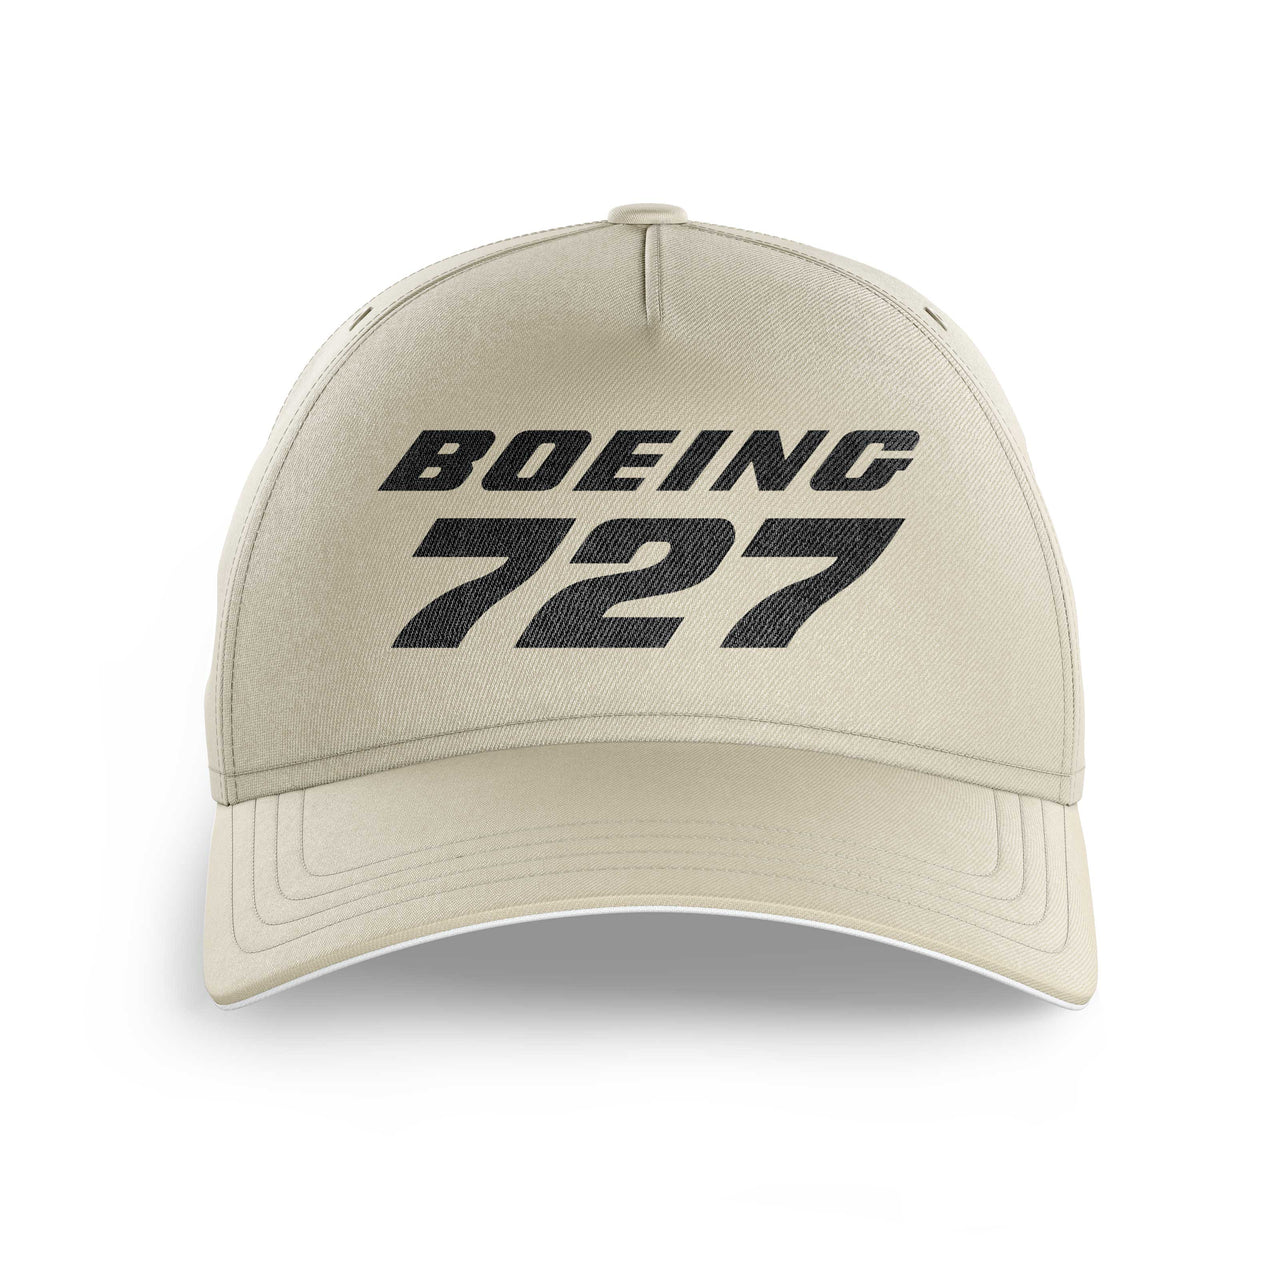 Boeing 727 & Text Printed Hats